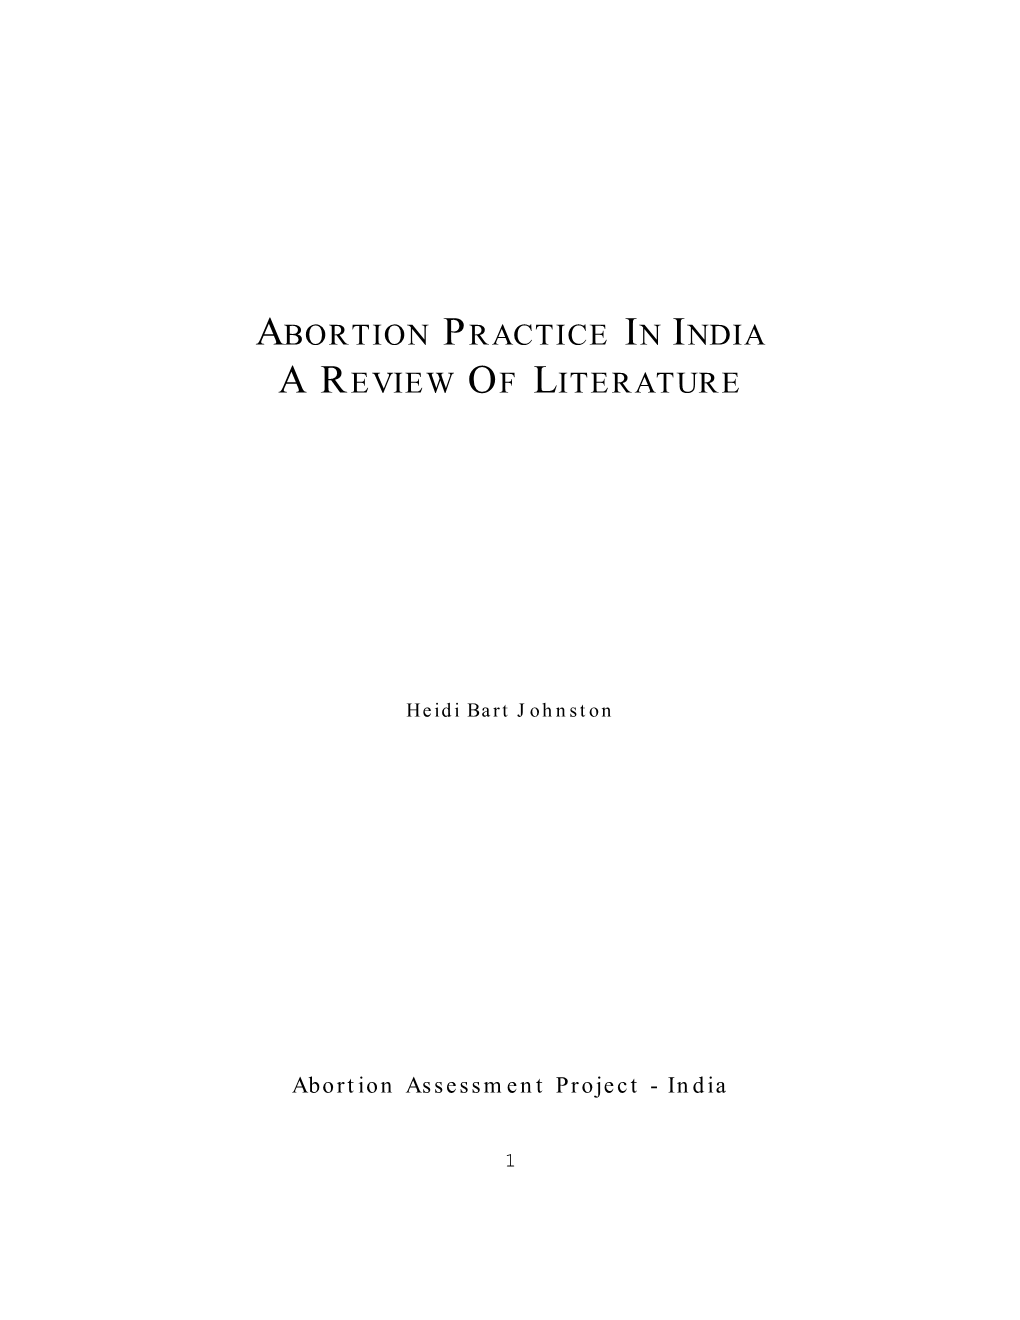 Abortion Practice in India a Review of Literature